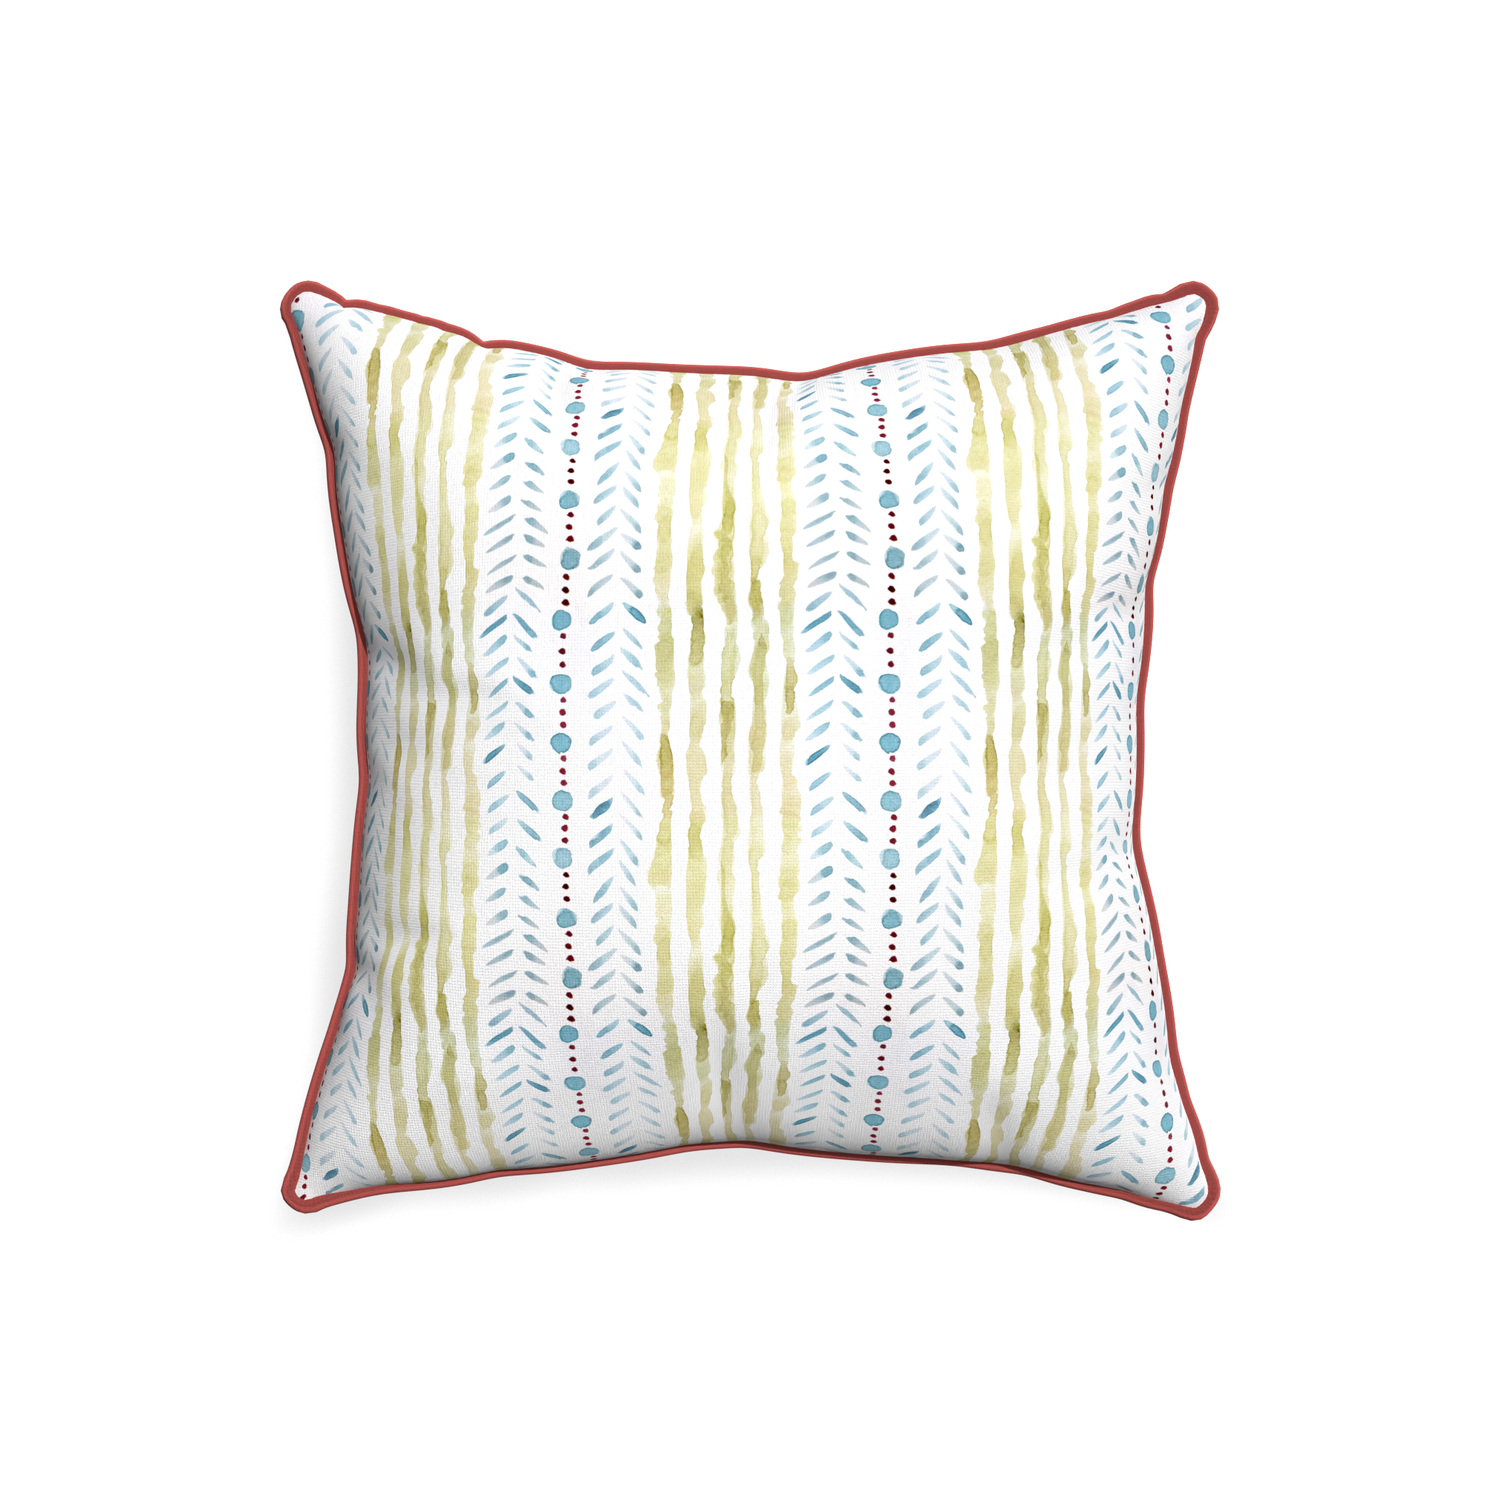 20-square julia custom pillow with c piping on white background